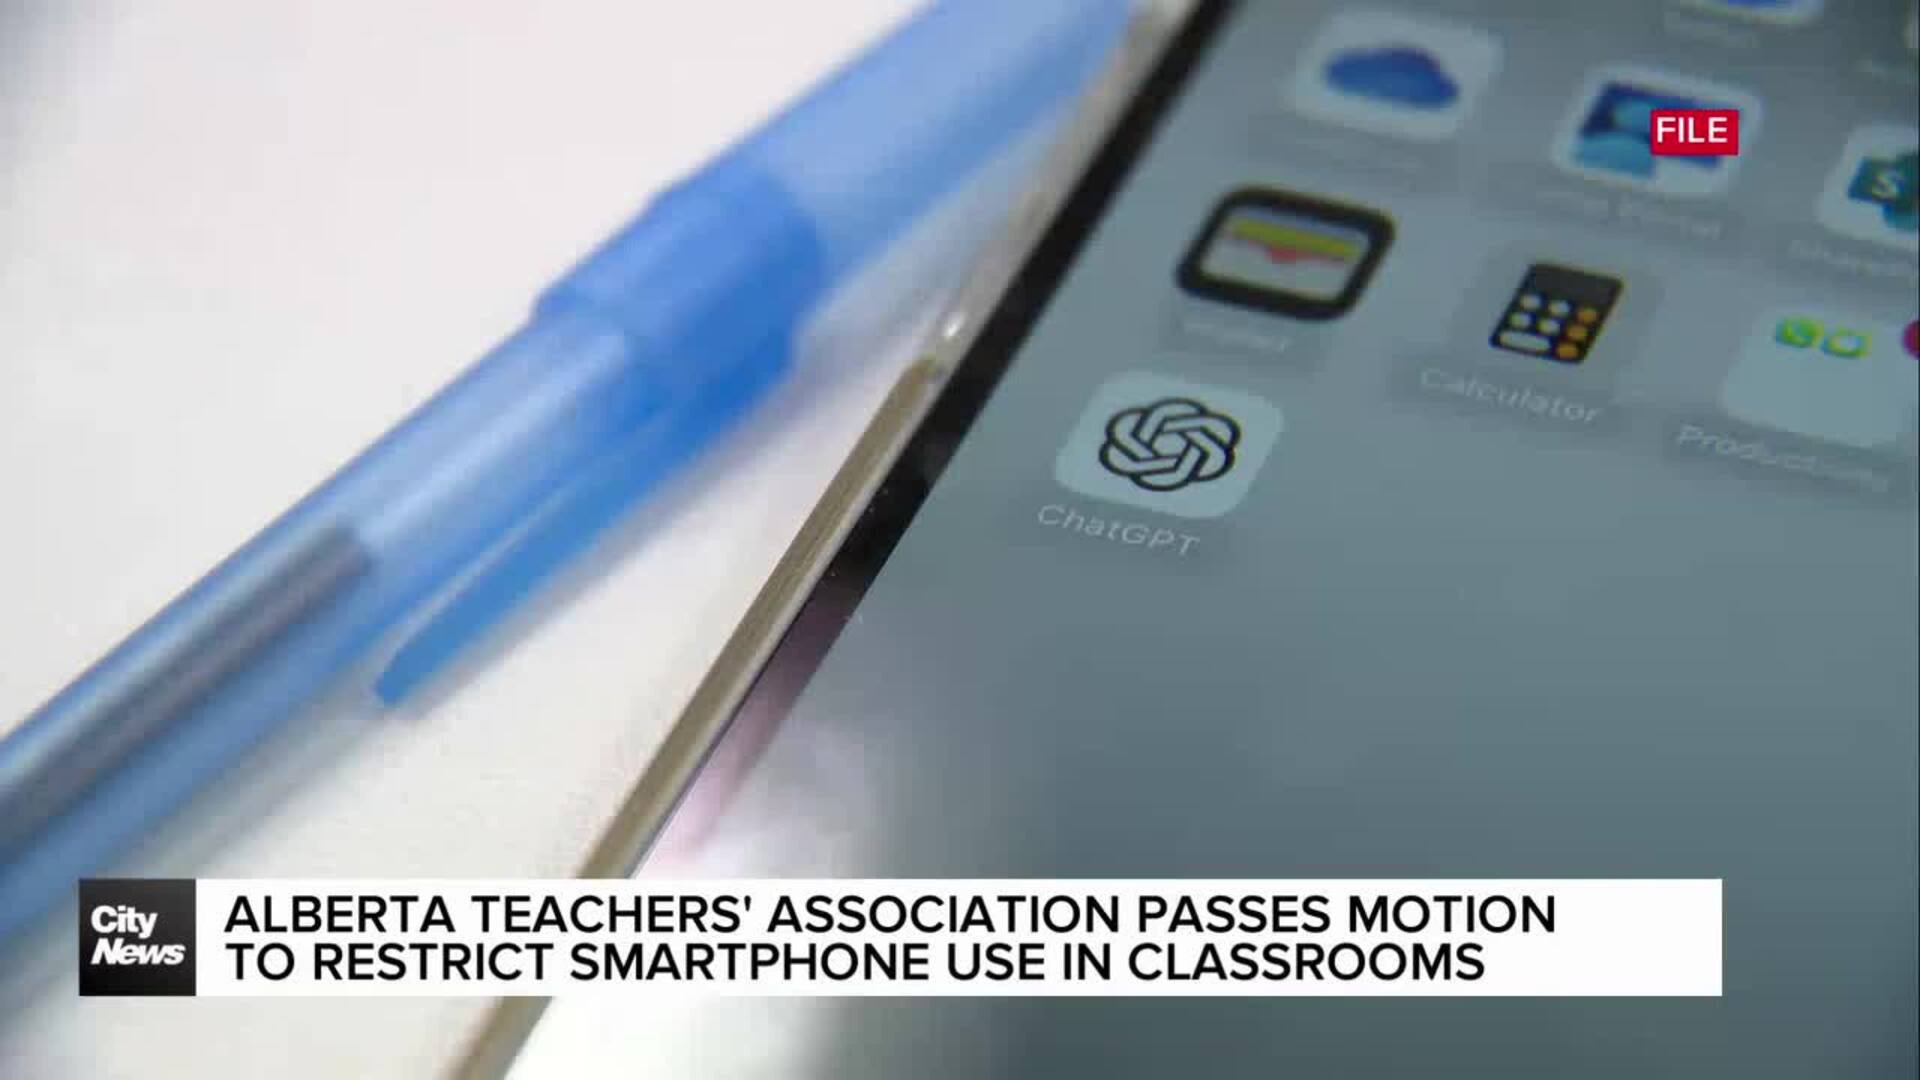 Alberta Teachers' Association passes motion to restrict smartphone use in classrooms